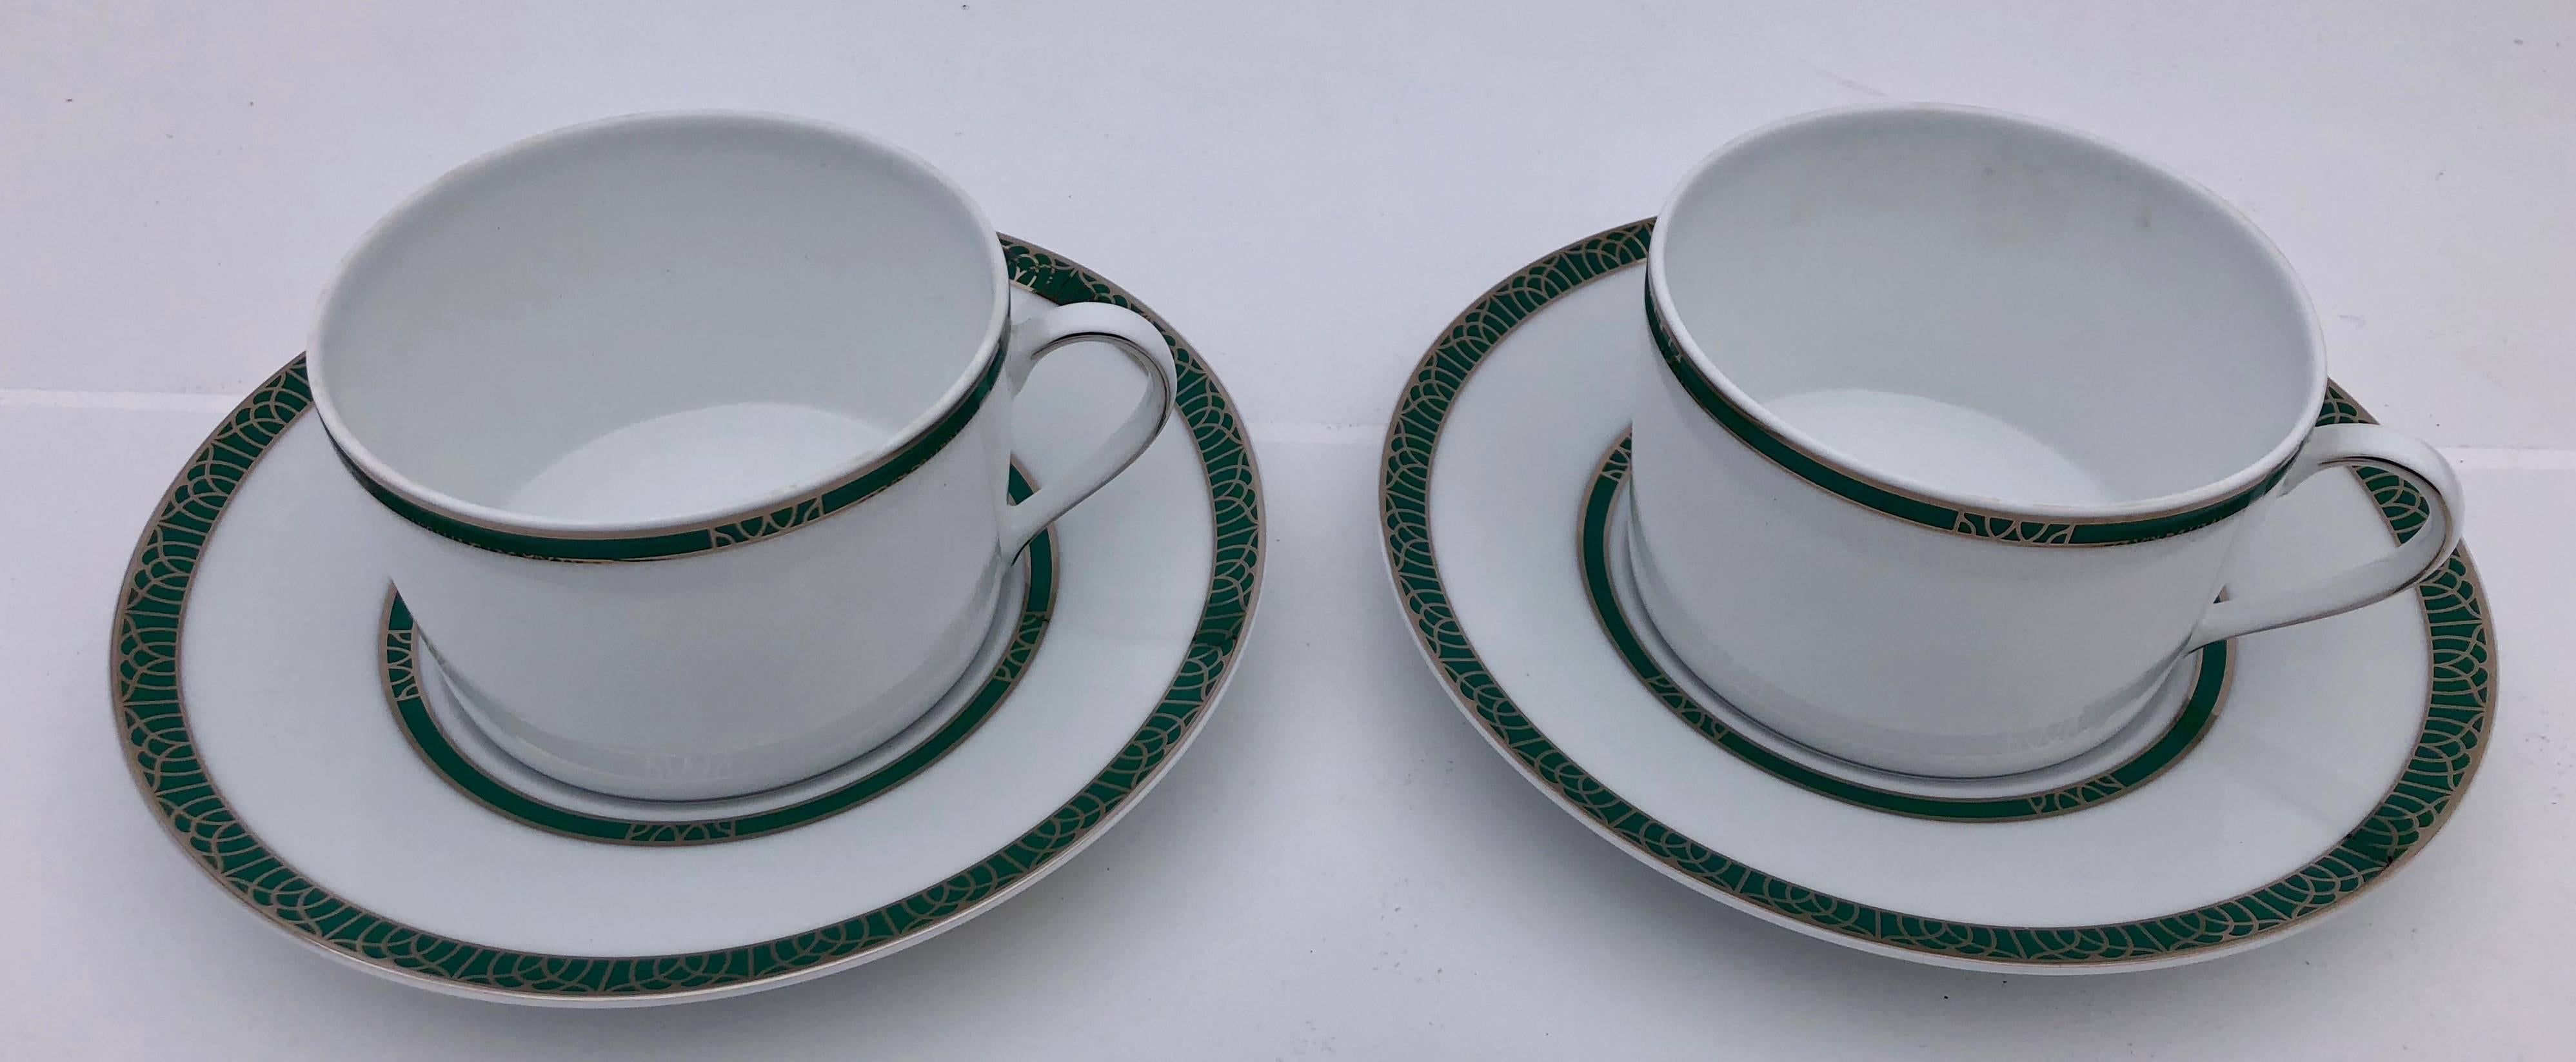 This is a beautiful Christofle porcelain tea set for two, 